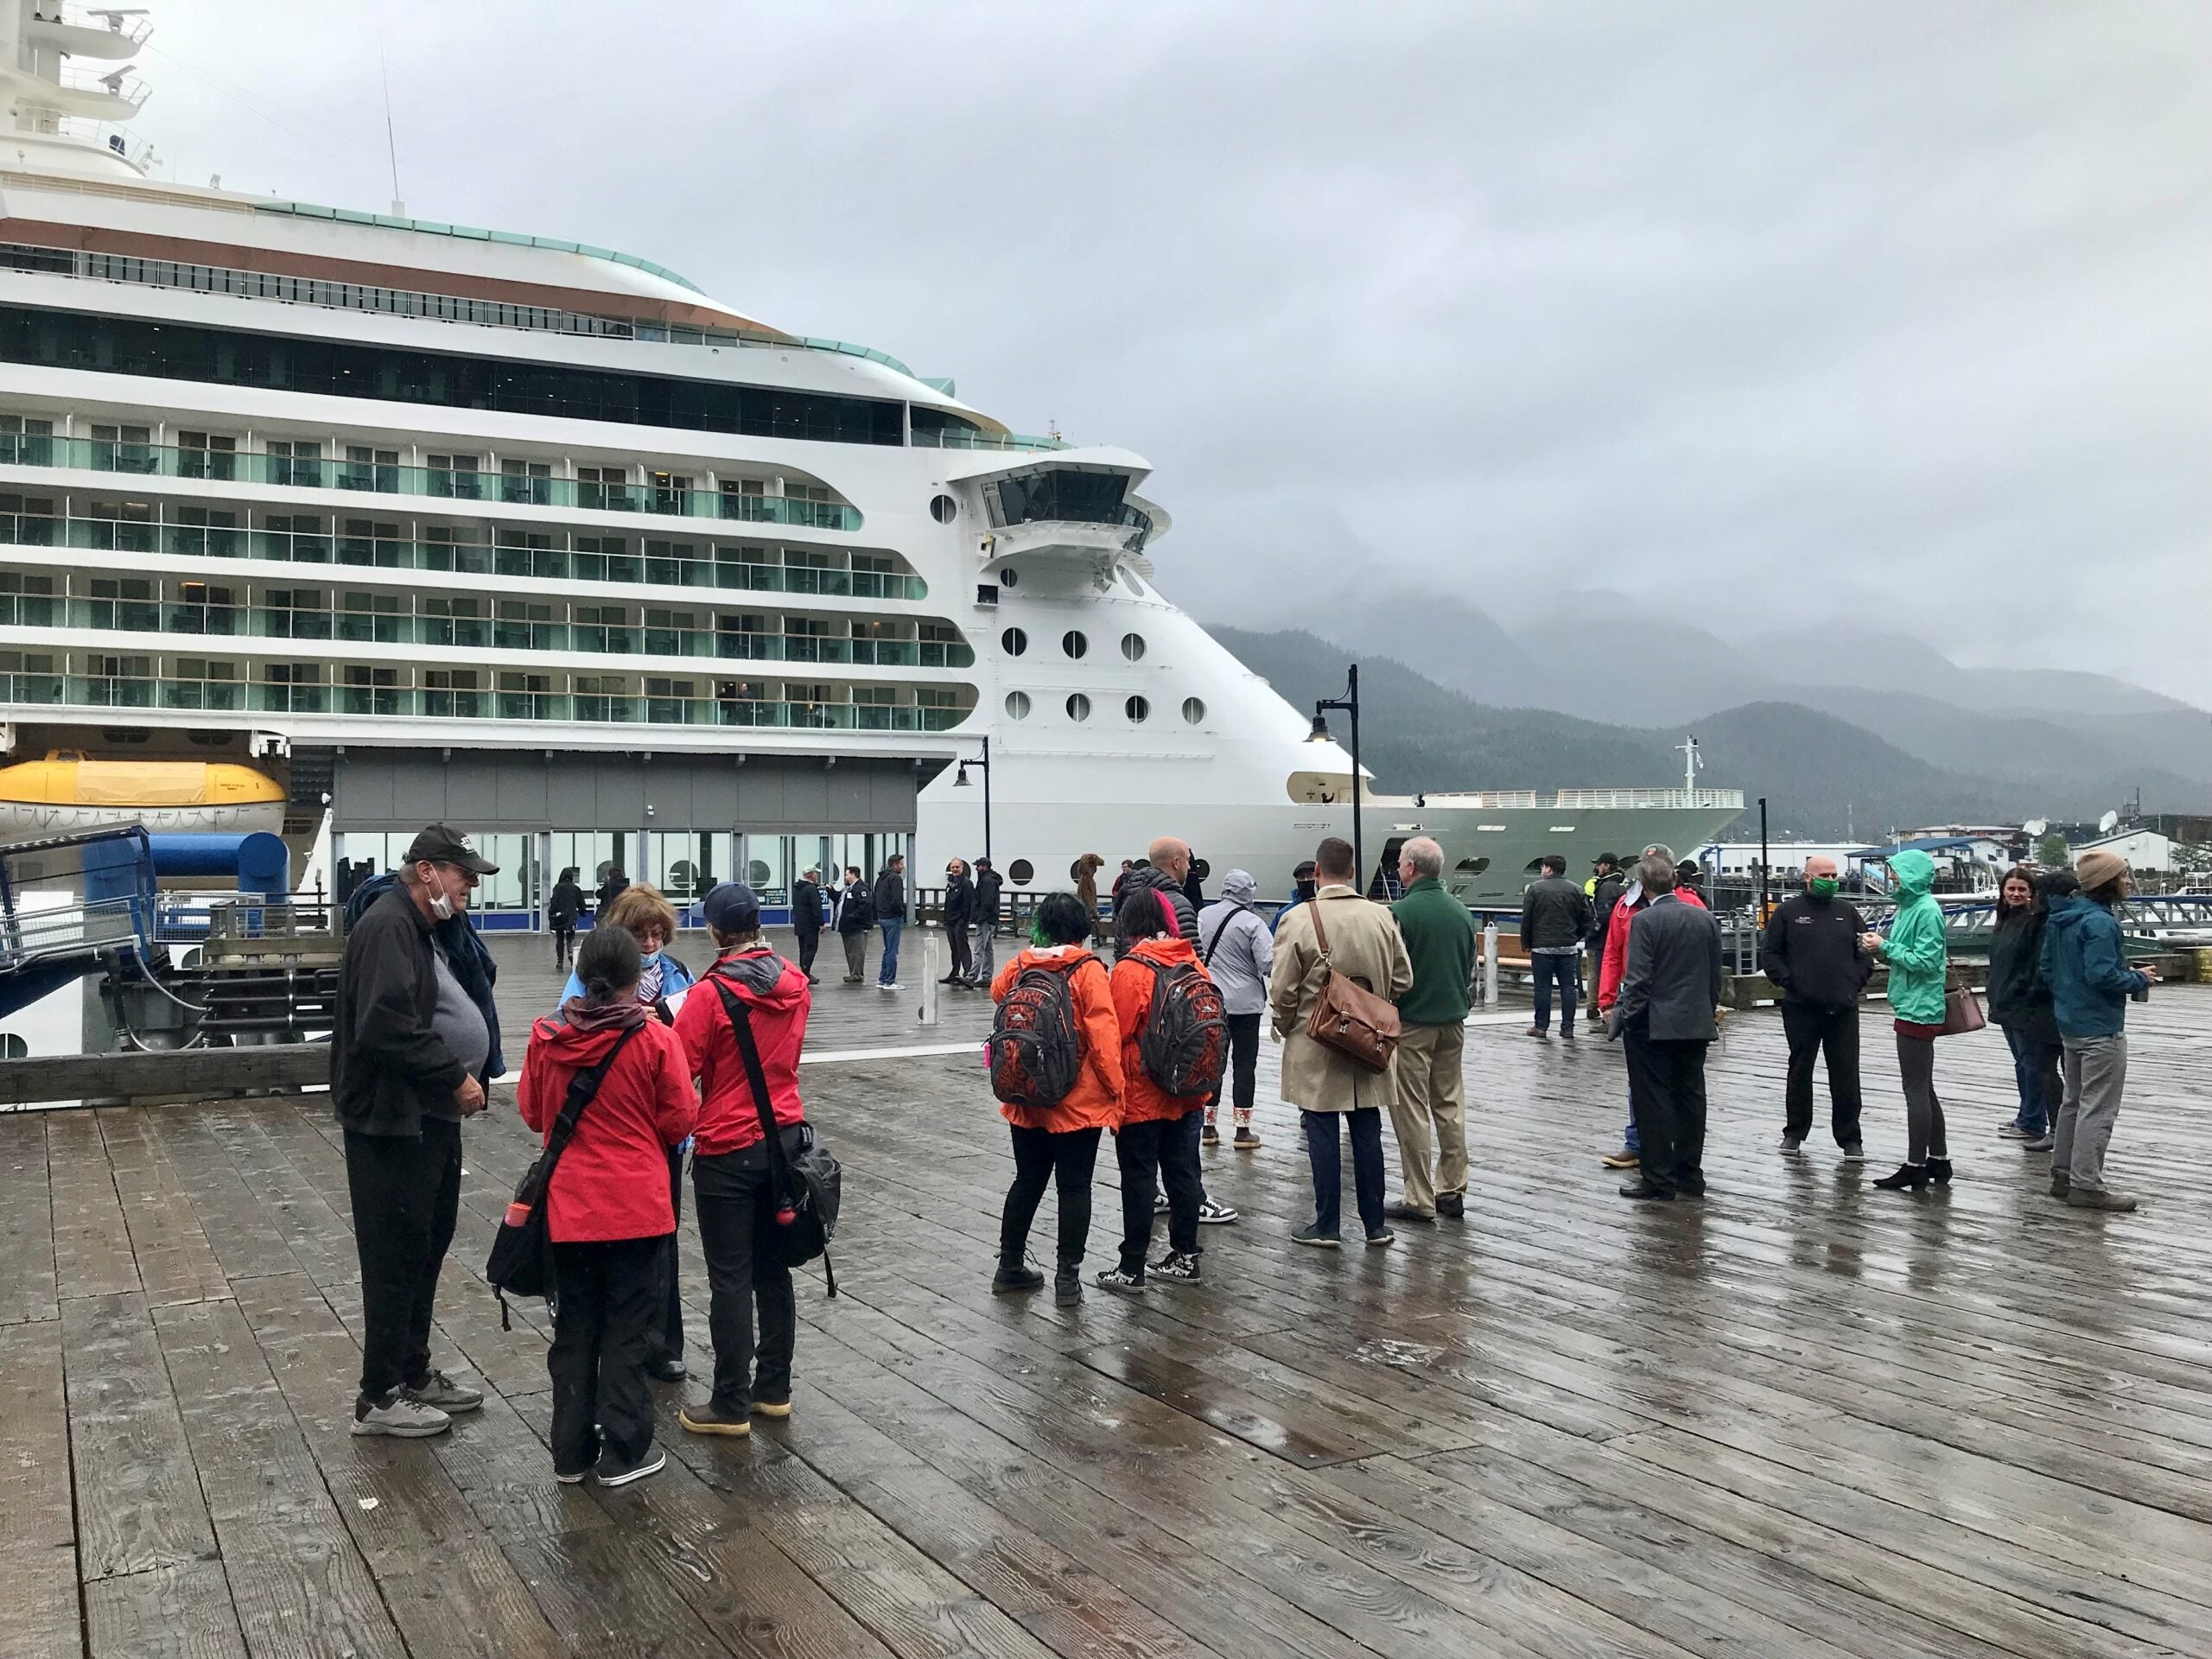 Why visiting Alaska's busiest cruise port, Juneau, is a bit surreal